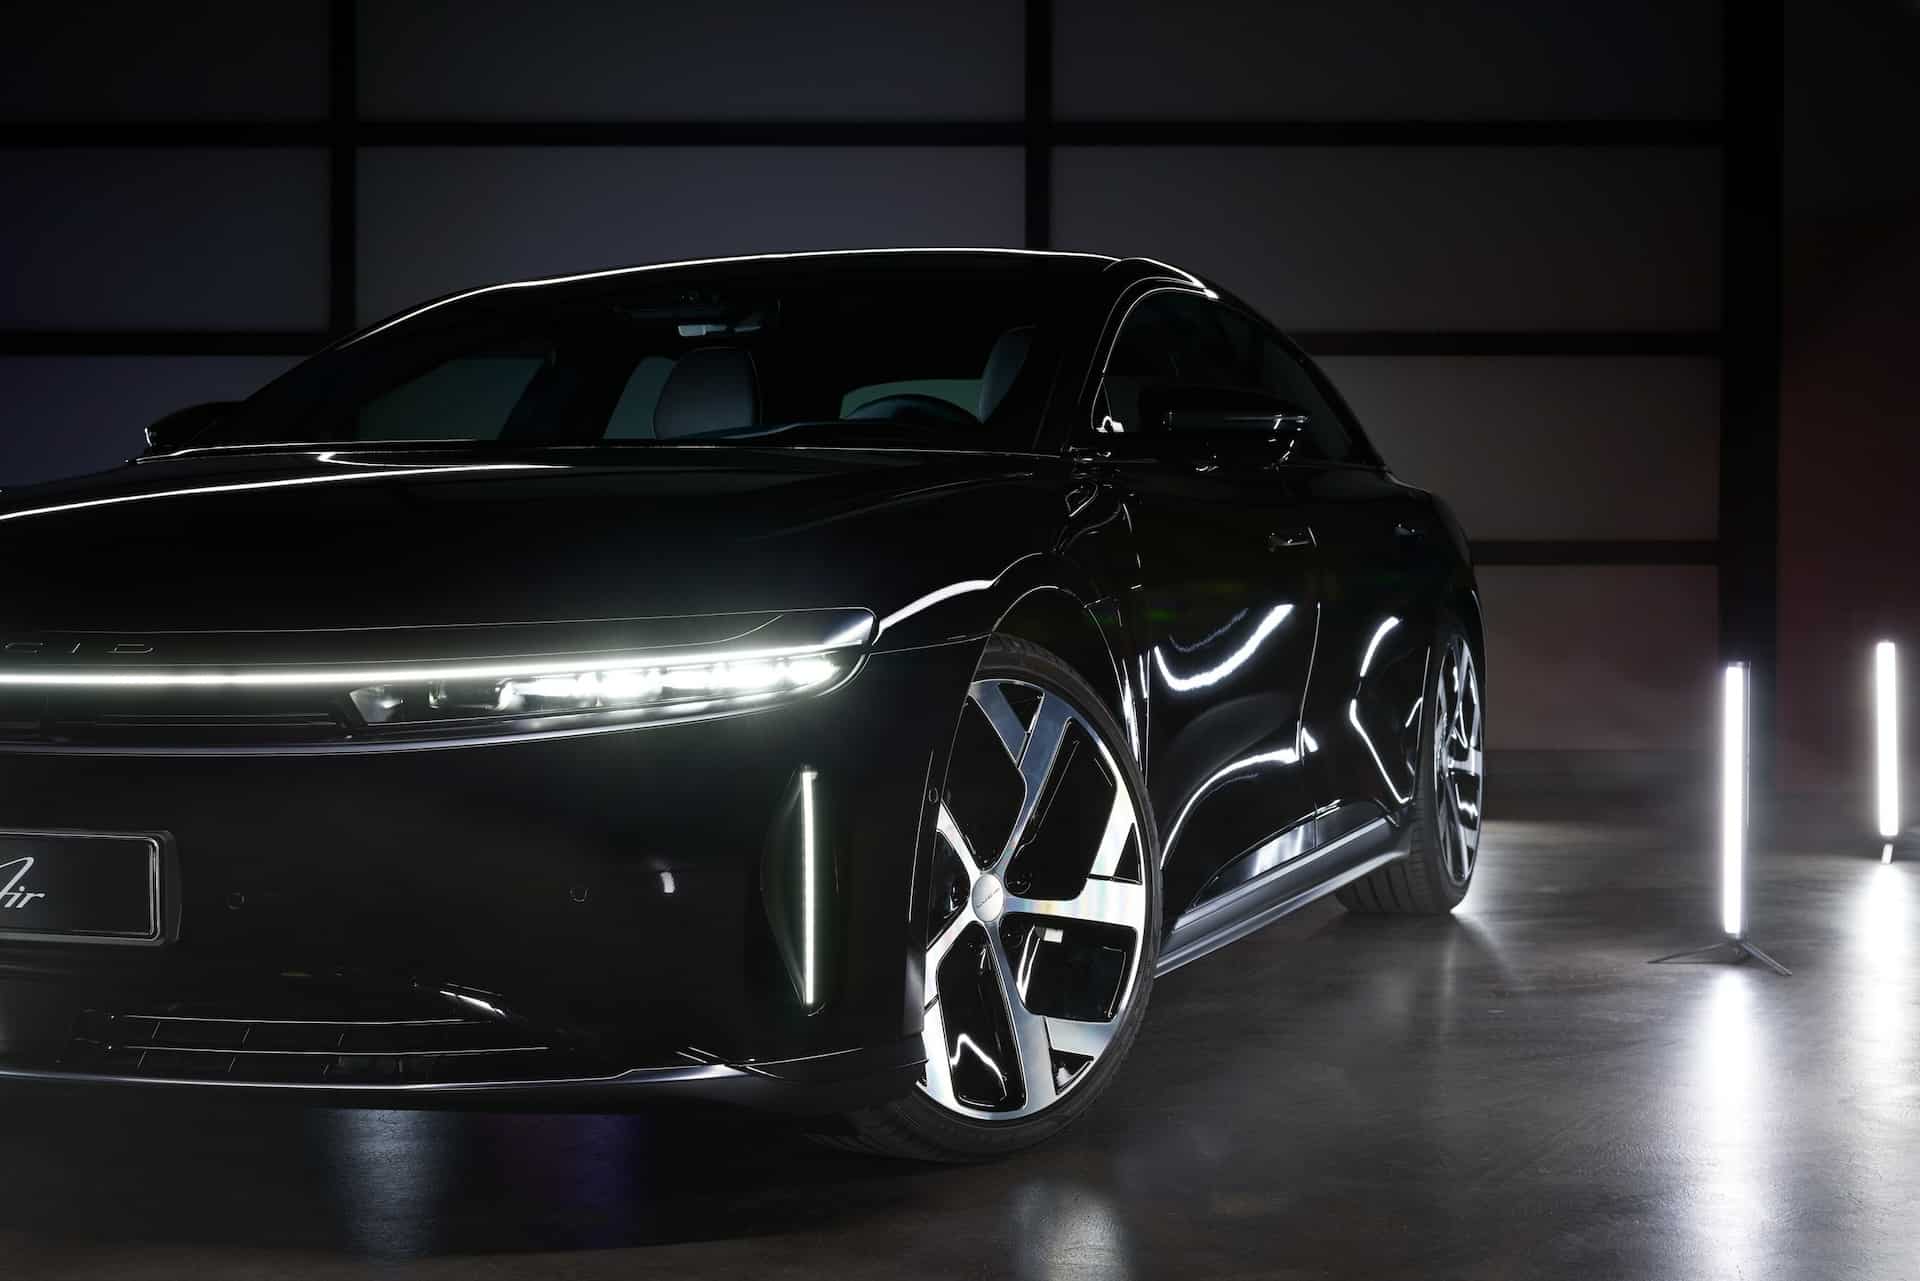 Munich Show witnesses Lucid Motors’ Unveiling of Exclusive Edition